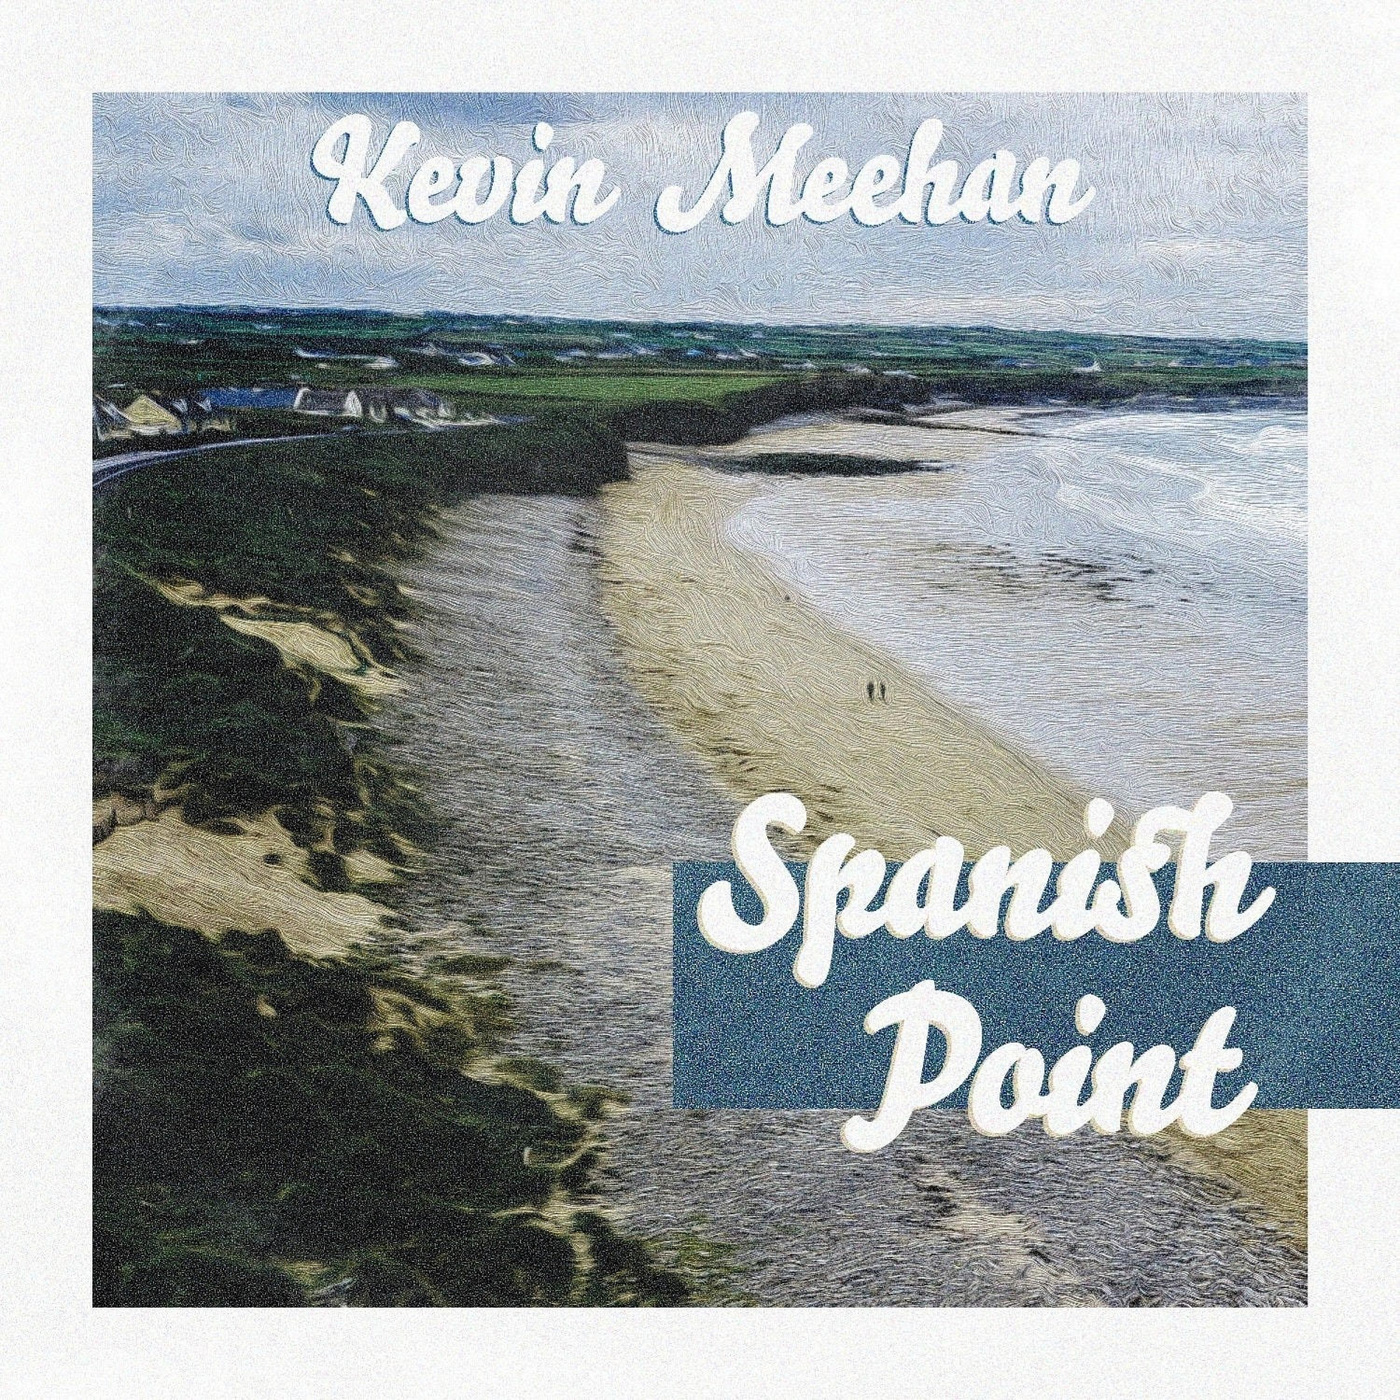 Kevin Meehan - 2021 - Spanish Point